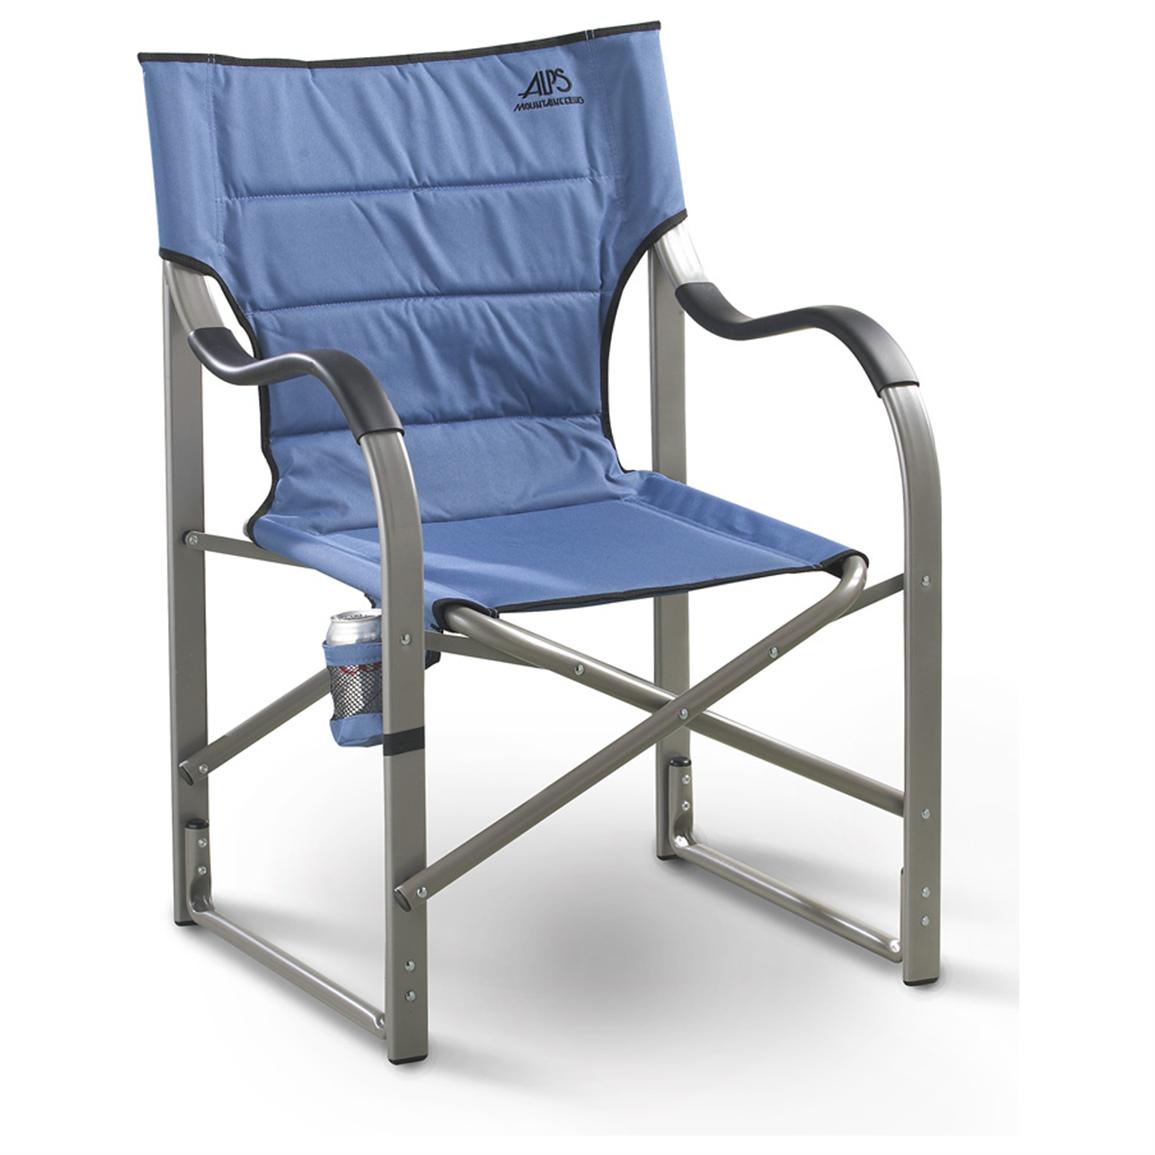 Comfortable/compact camping chairs for ISATA 3 - Forest River Forums